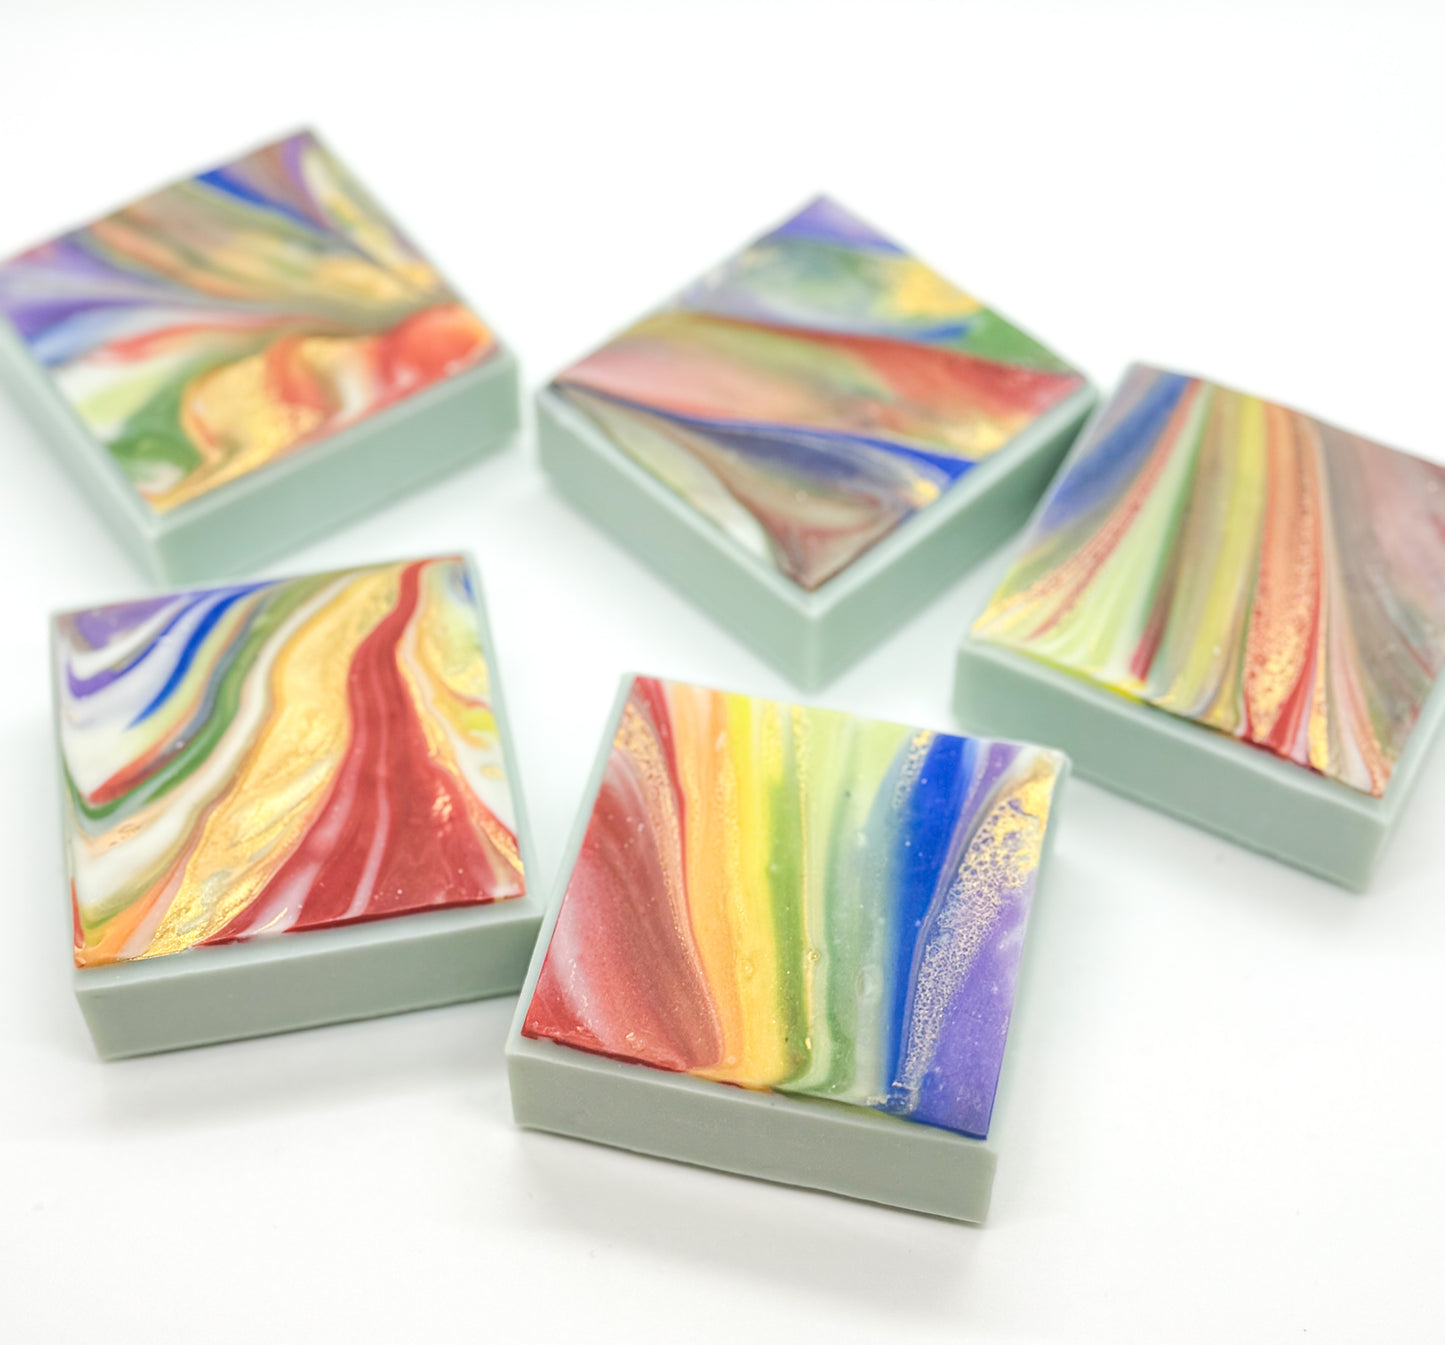 Dipping 4.3 oz Skittles Rainbow Artisanal Face and Body Soap